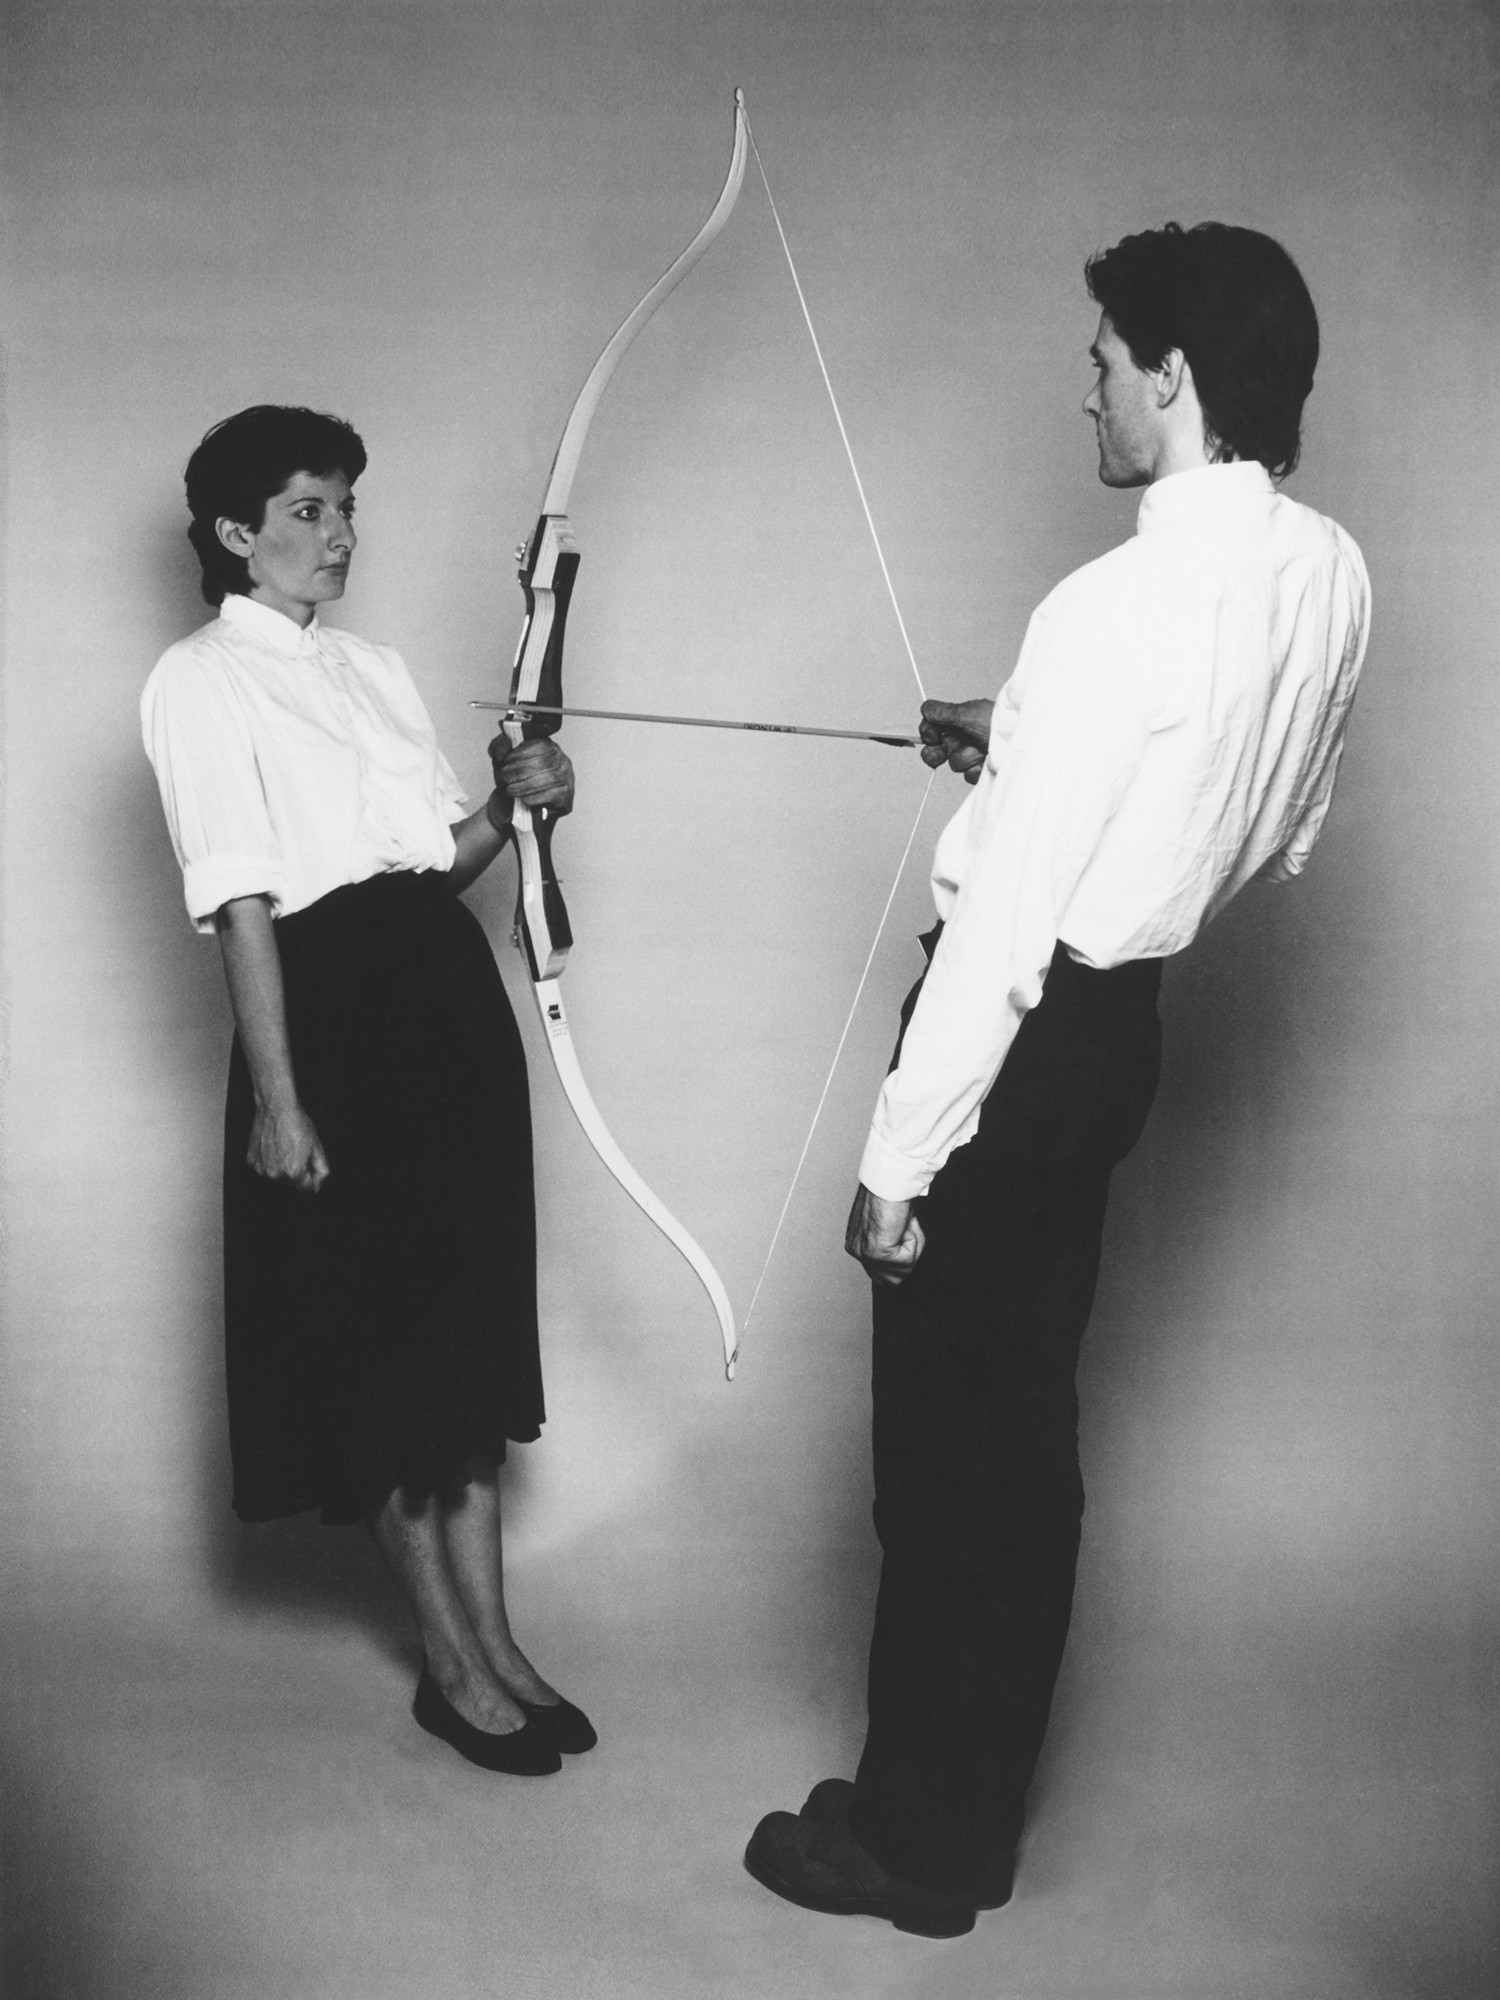 Marina Abramović and Ulay. _Rest Energy_. Performed in August 1980 for four minutes at ROSC’80, National Gallery of Ireland. Production image (black and white) for 16mm film transferred to video (color, sound). 47 min. © 2010 Marina Abramović. Courtesy Marina Abramović and Sean Kelly Gallery/Artists Rights Society (ARS), New York